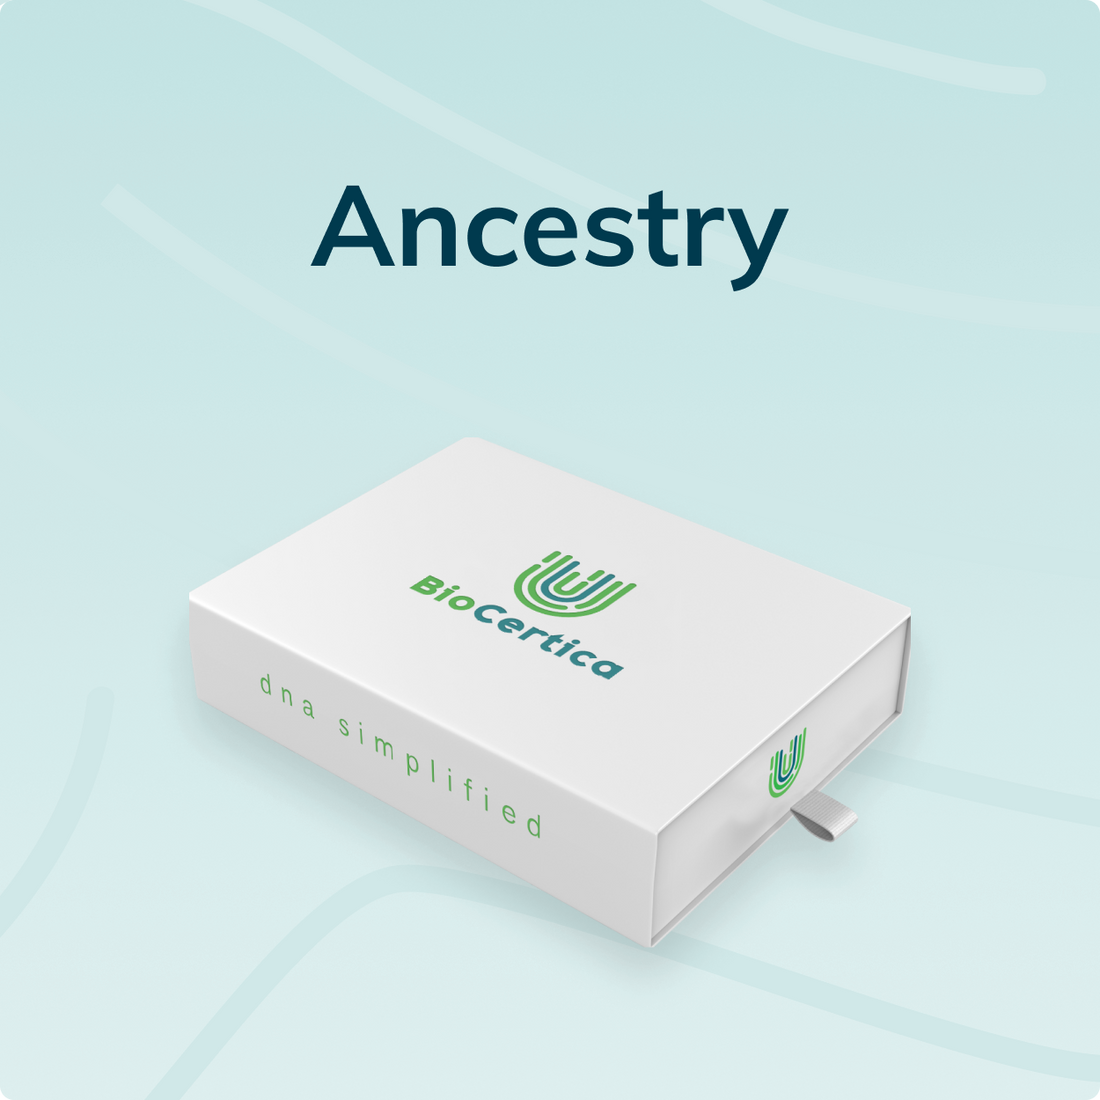 Ancestry product